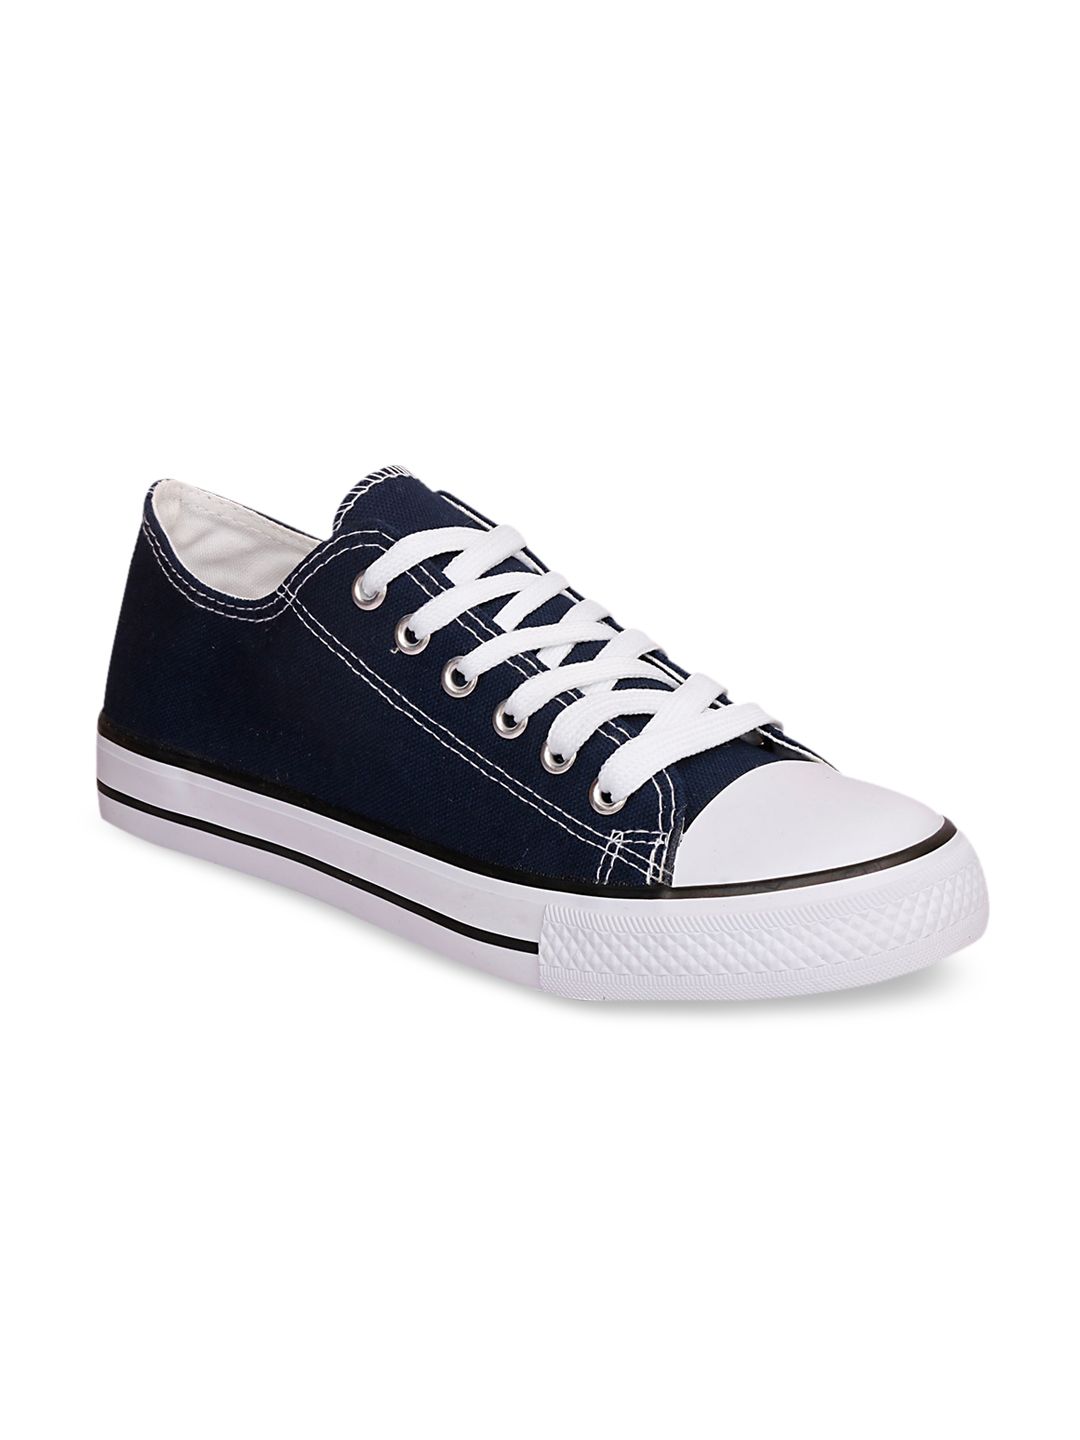 CIPRAMO SPORTS Women Navy Blue Canvas Sneakers Price in India